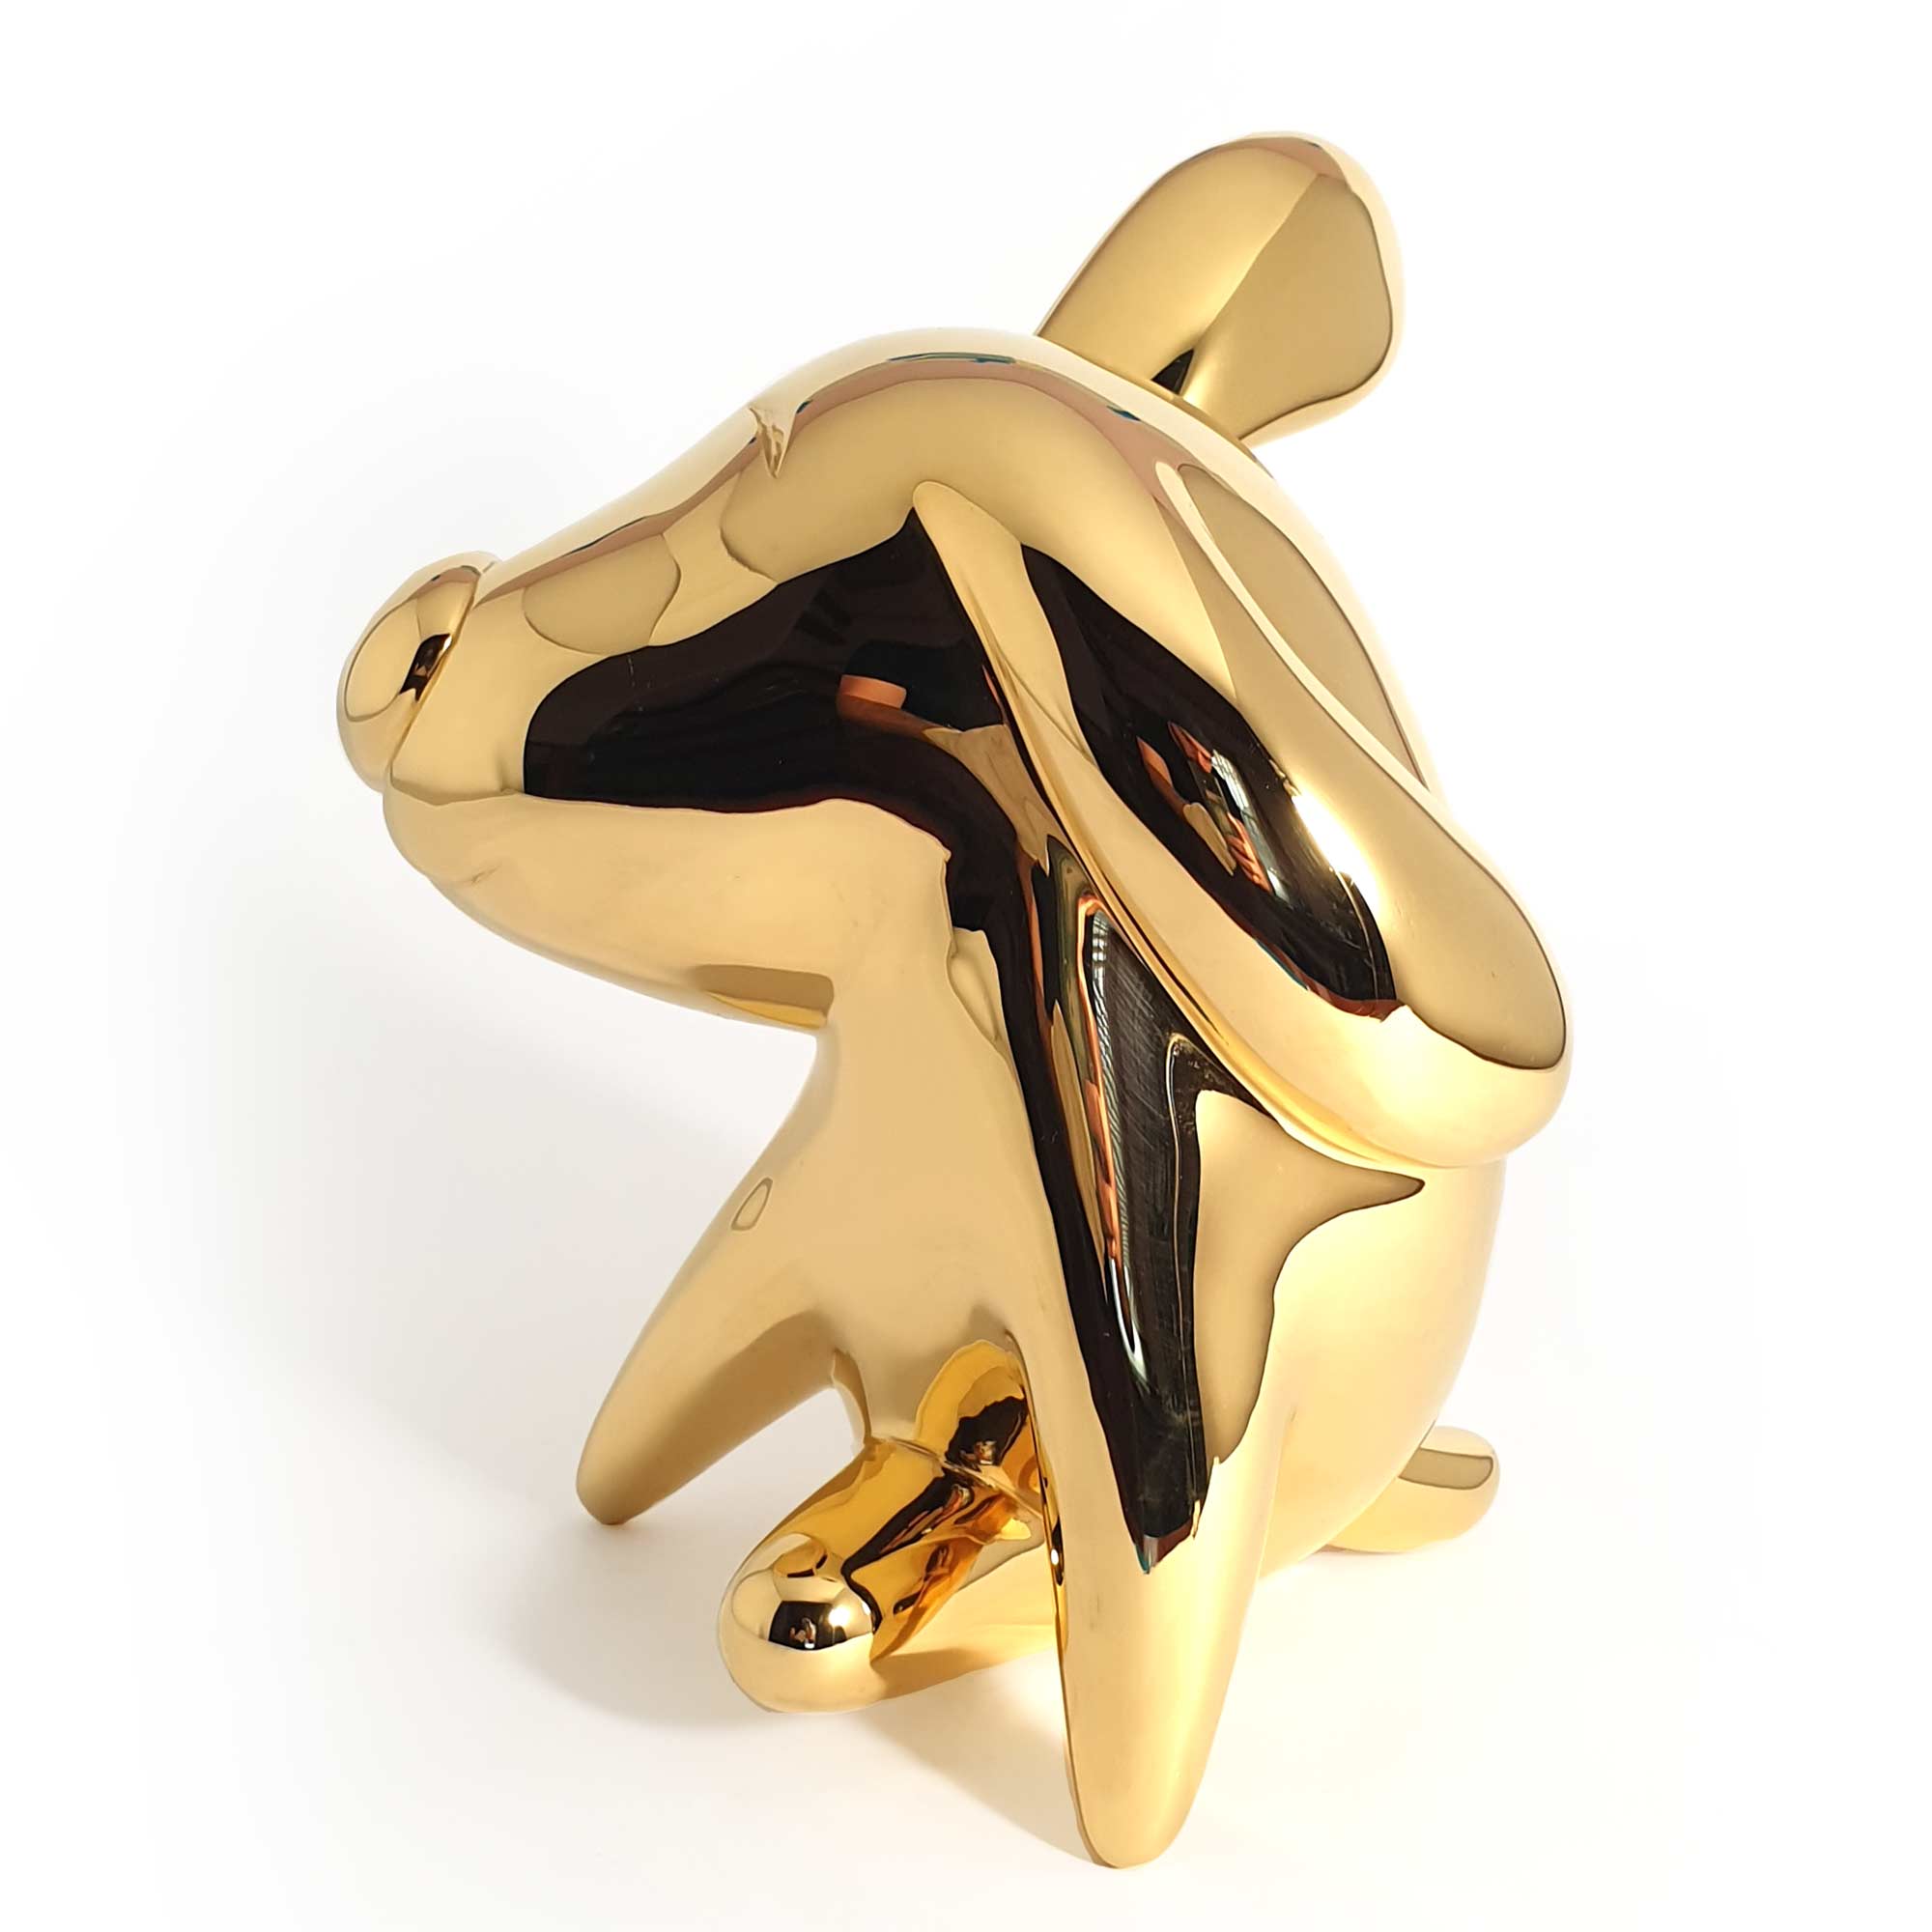 The itch, dog sculpture, Gold Mirror Polished Stainless Steel Sculpture, by artist Ferdi B Dick, side view 